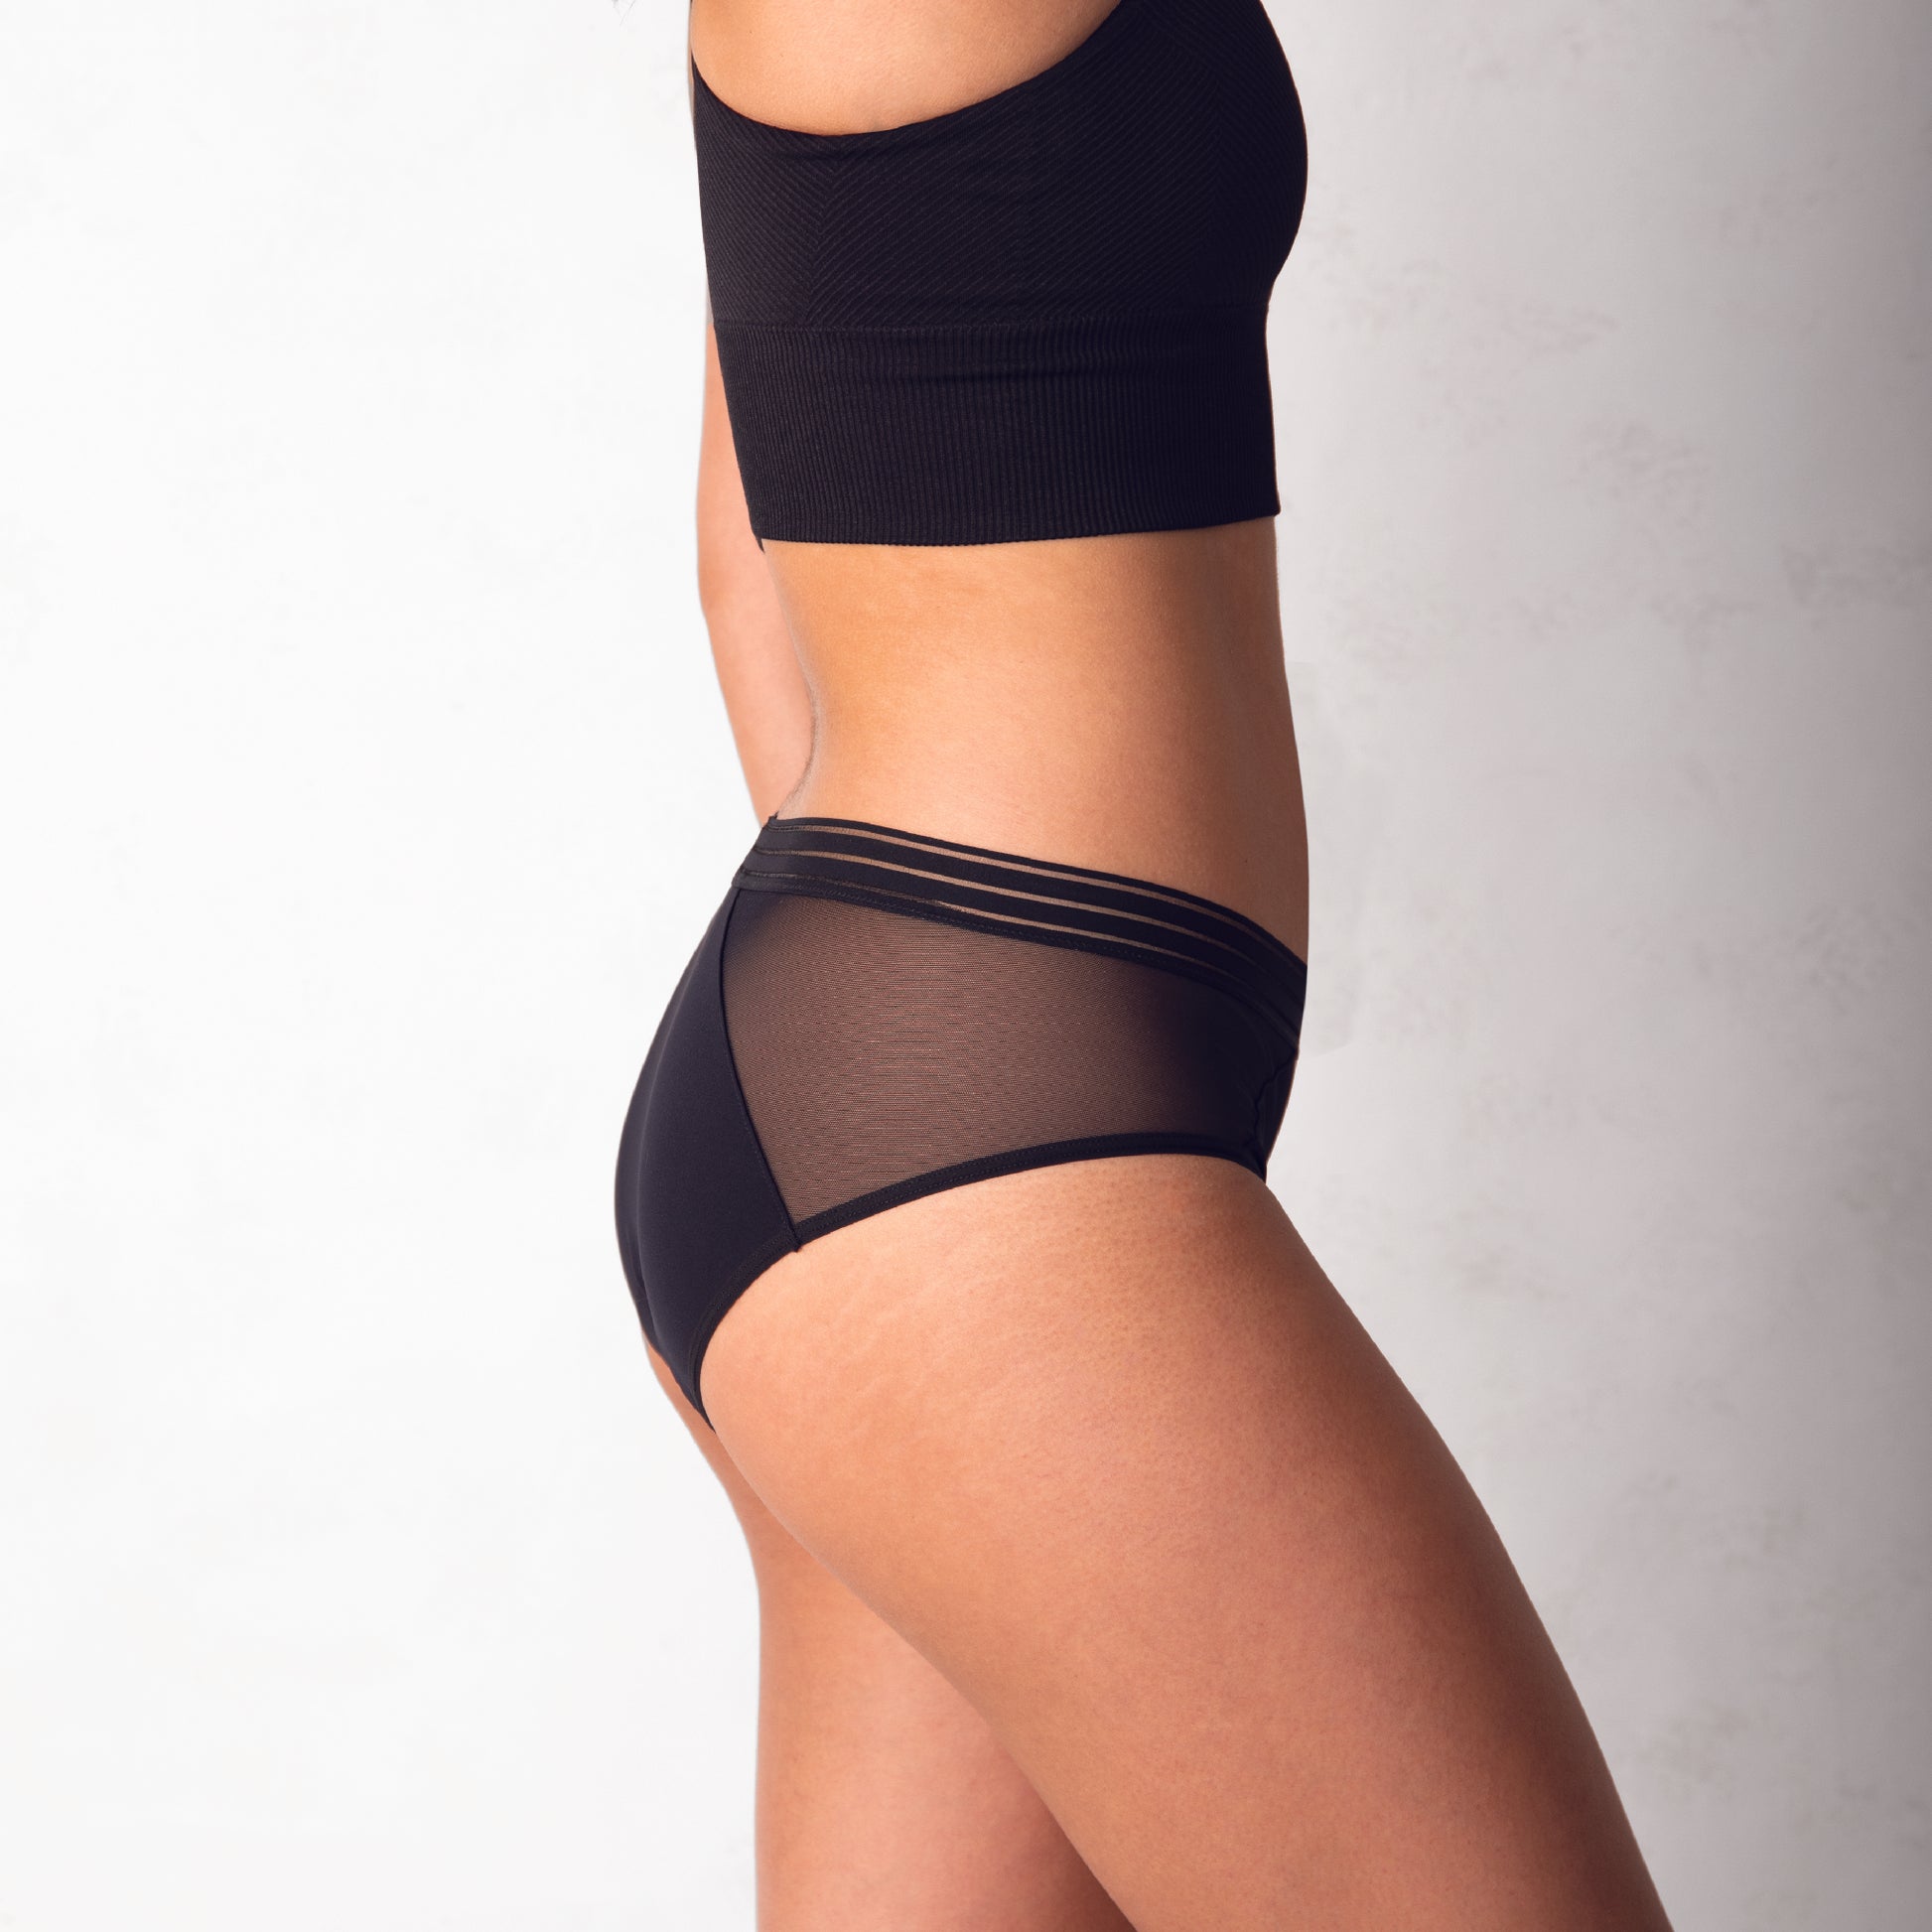 saalt Reusable Period Underwear - Comfortable, Thin, and Keeps You